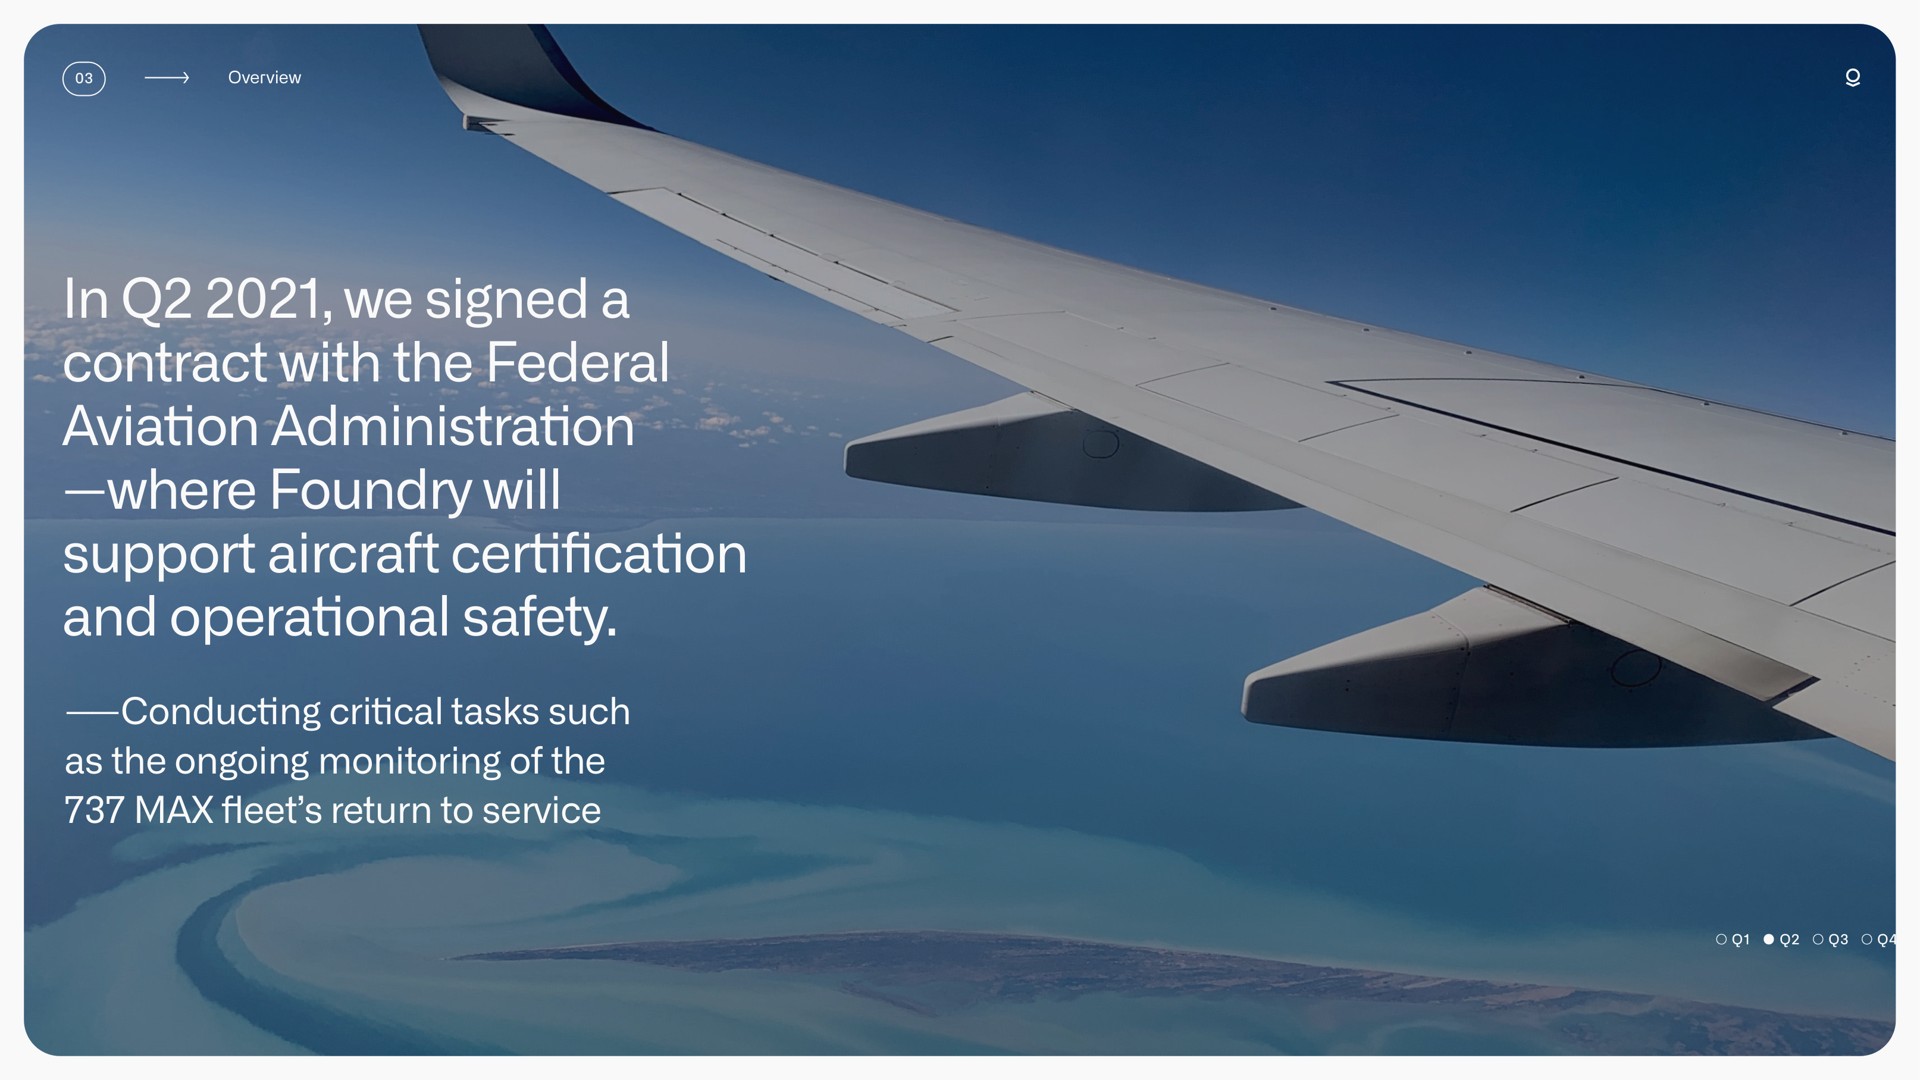 in we signed a contract with the federal aviation administration where foundry will support aircraft cation and operational safety cal tasks such as the ongoing monitoring of the return to service certification conducting critical fleet | Palantir